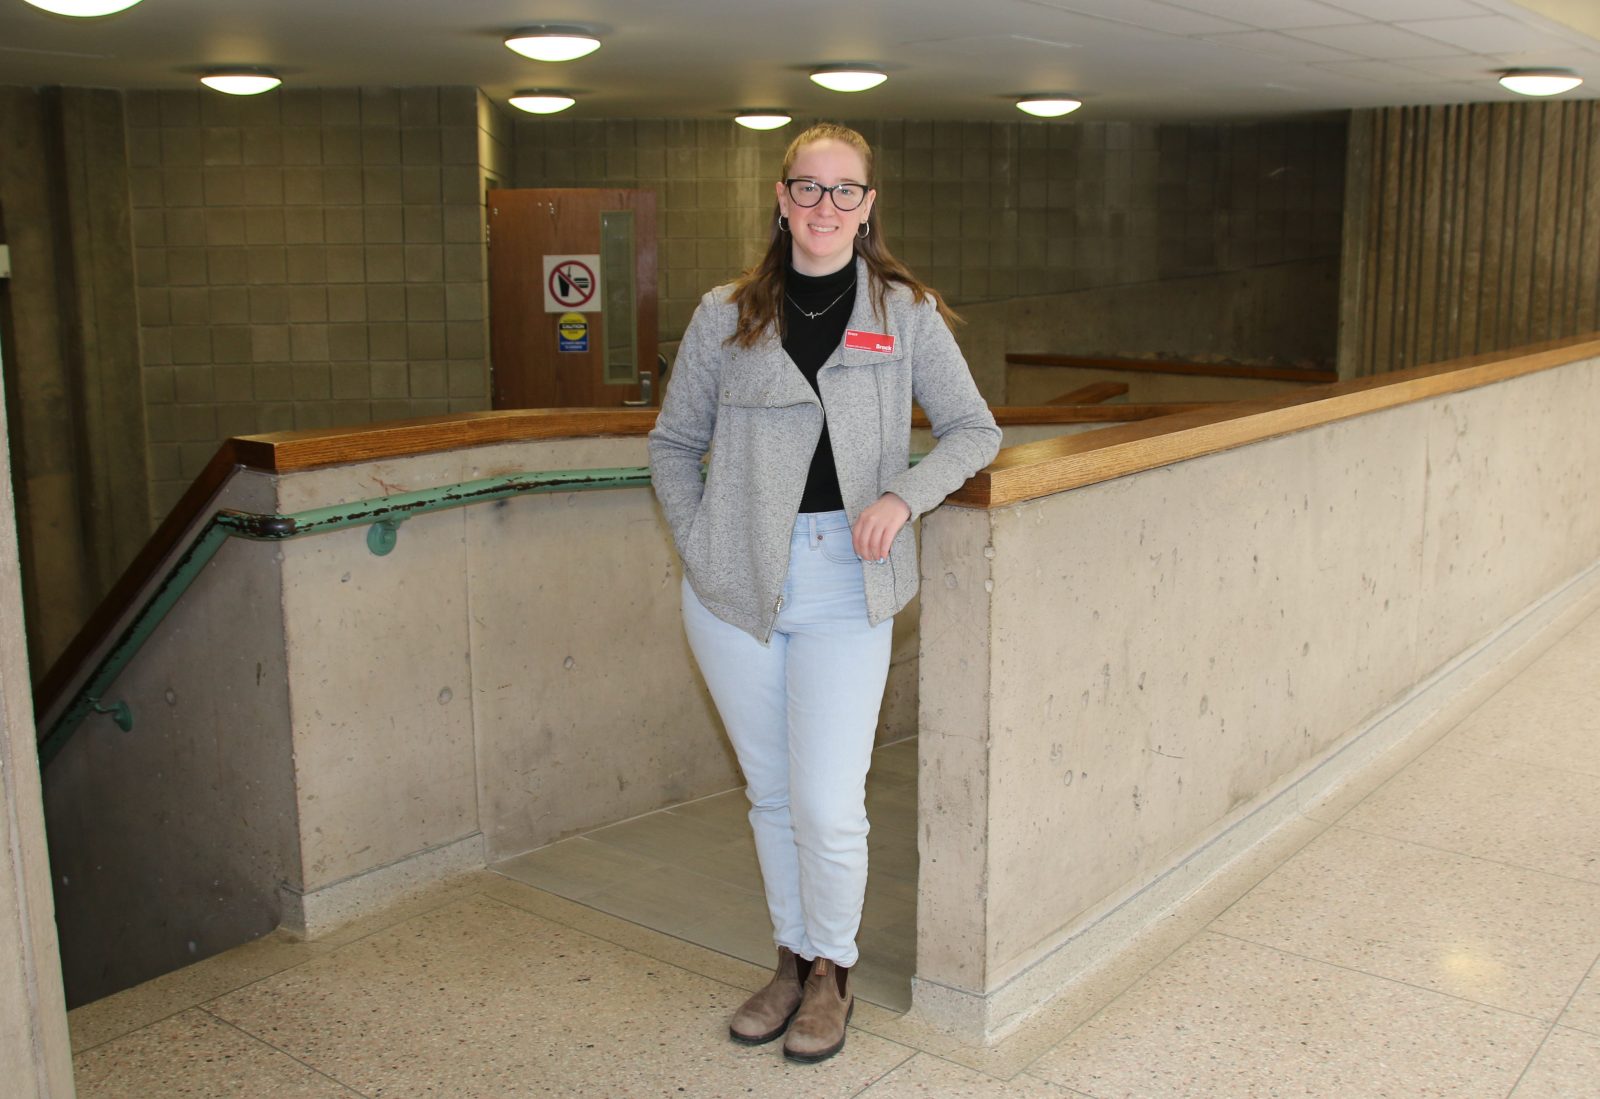 A woman stands in front of an indoor ramp leading to a lecture hall.